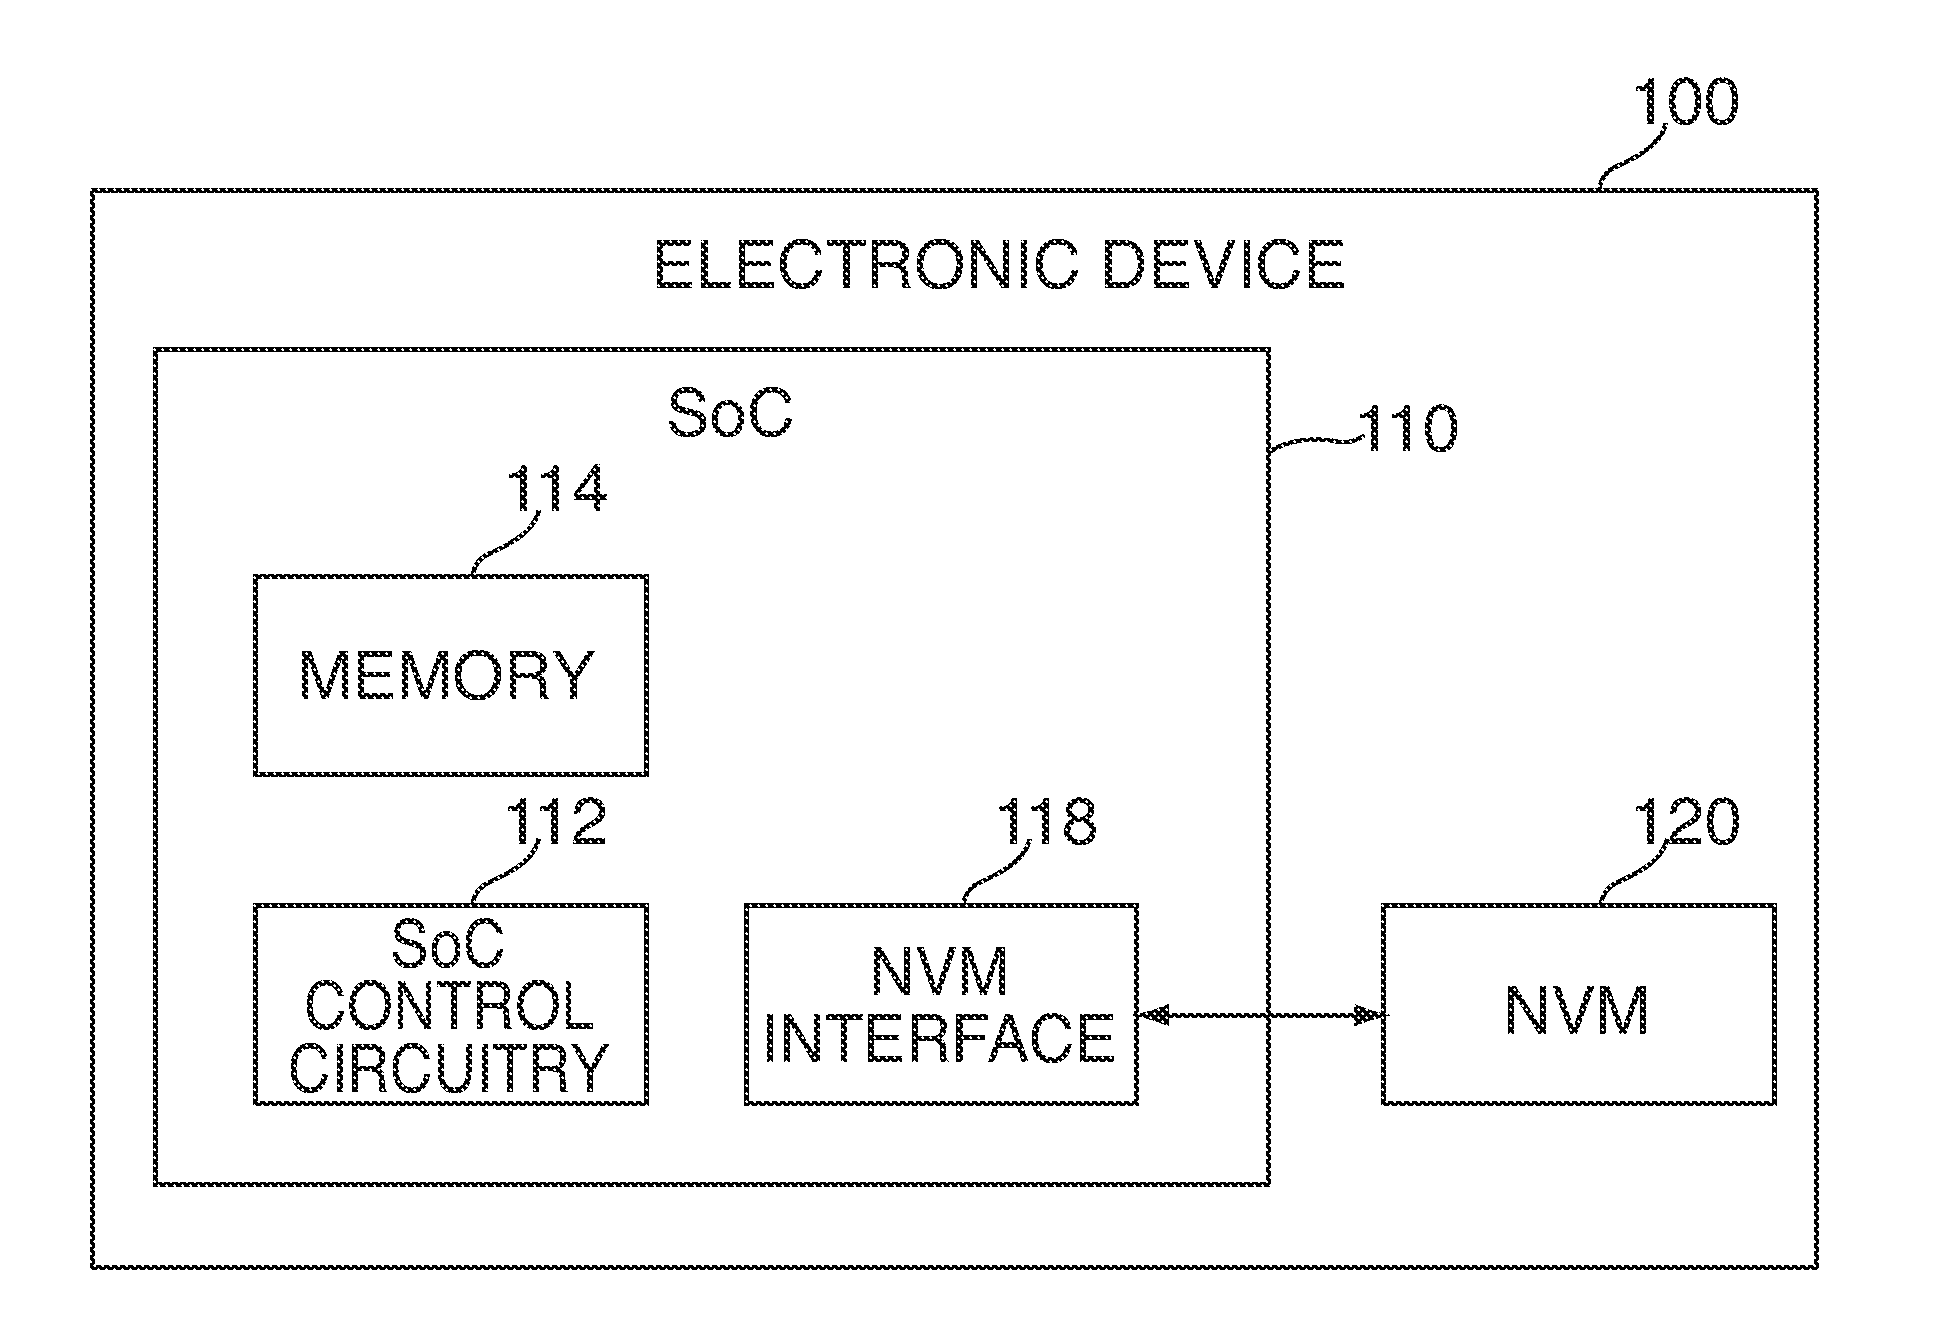 Methods and systems for monitoring write operations of non-volatile memory